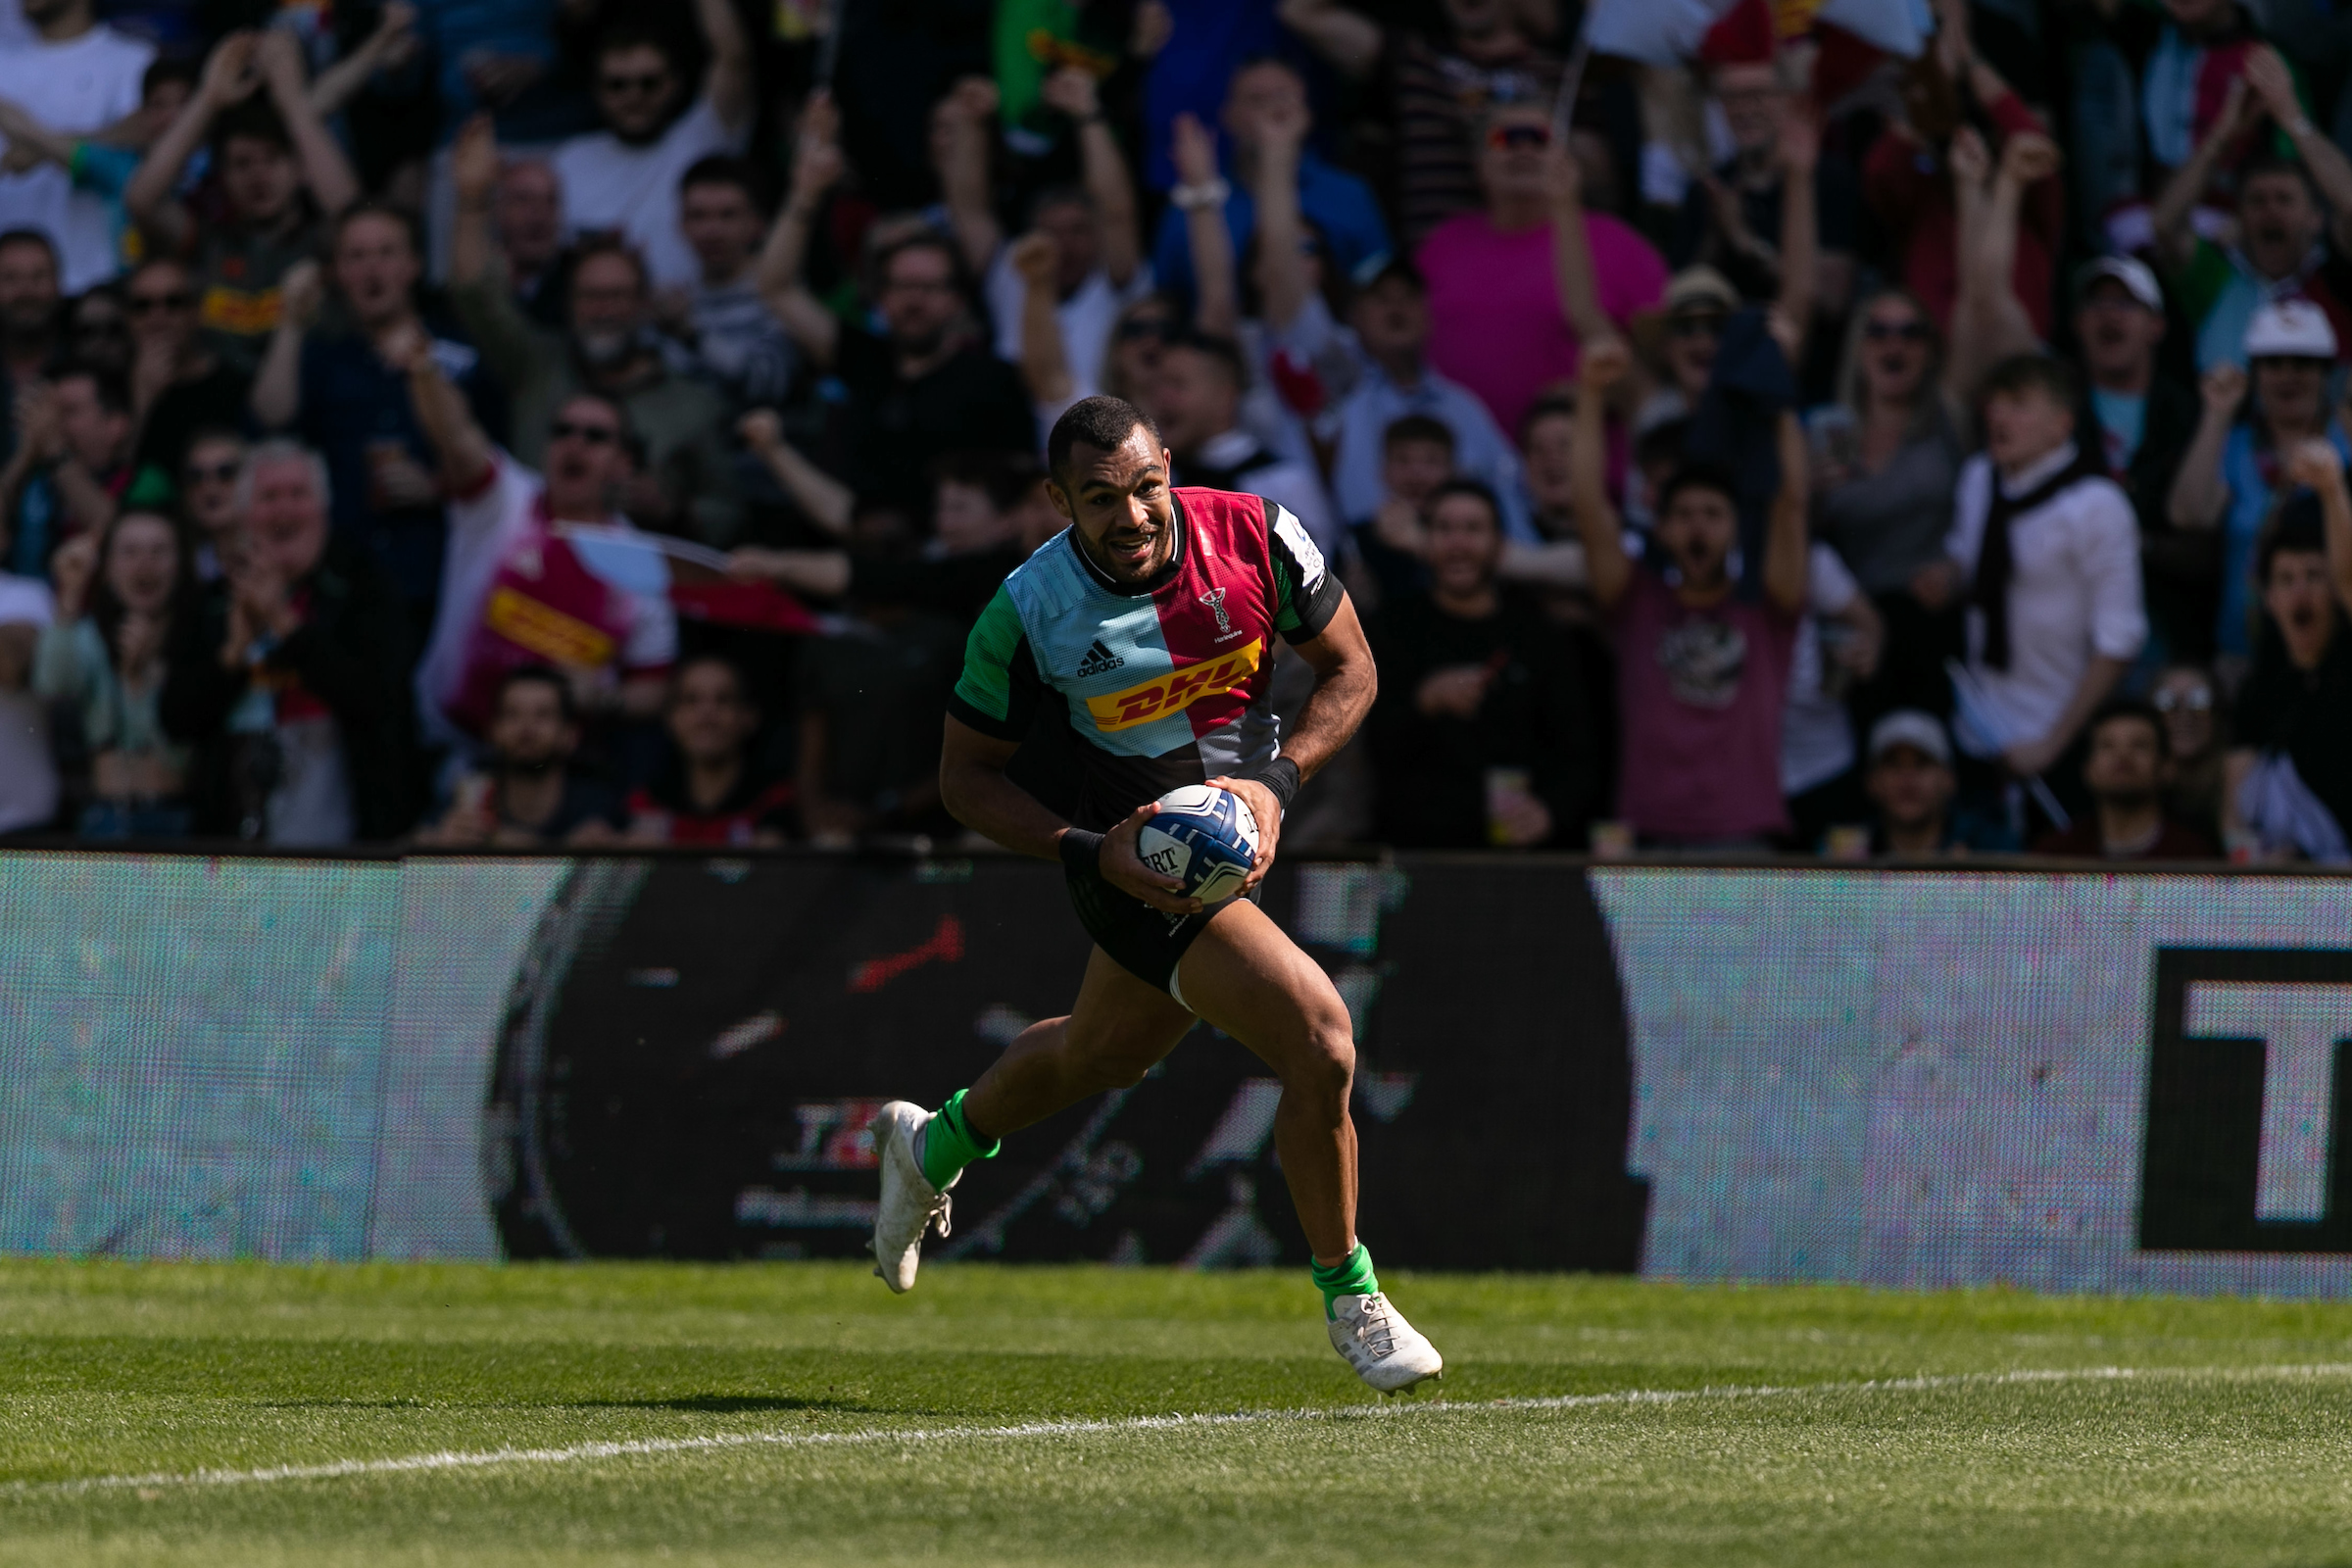 Quins to face Racing 92 and Sharks | Harlequins FC